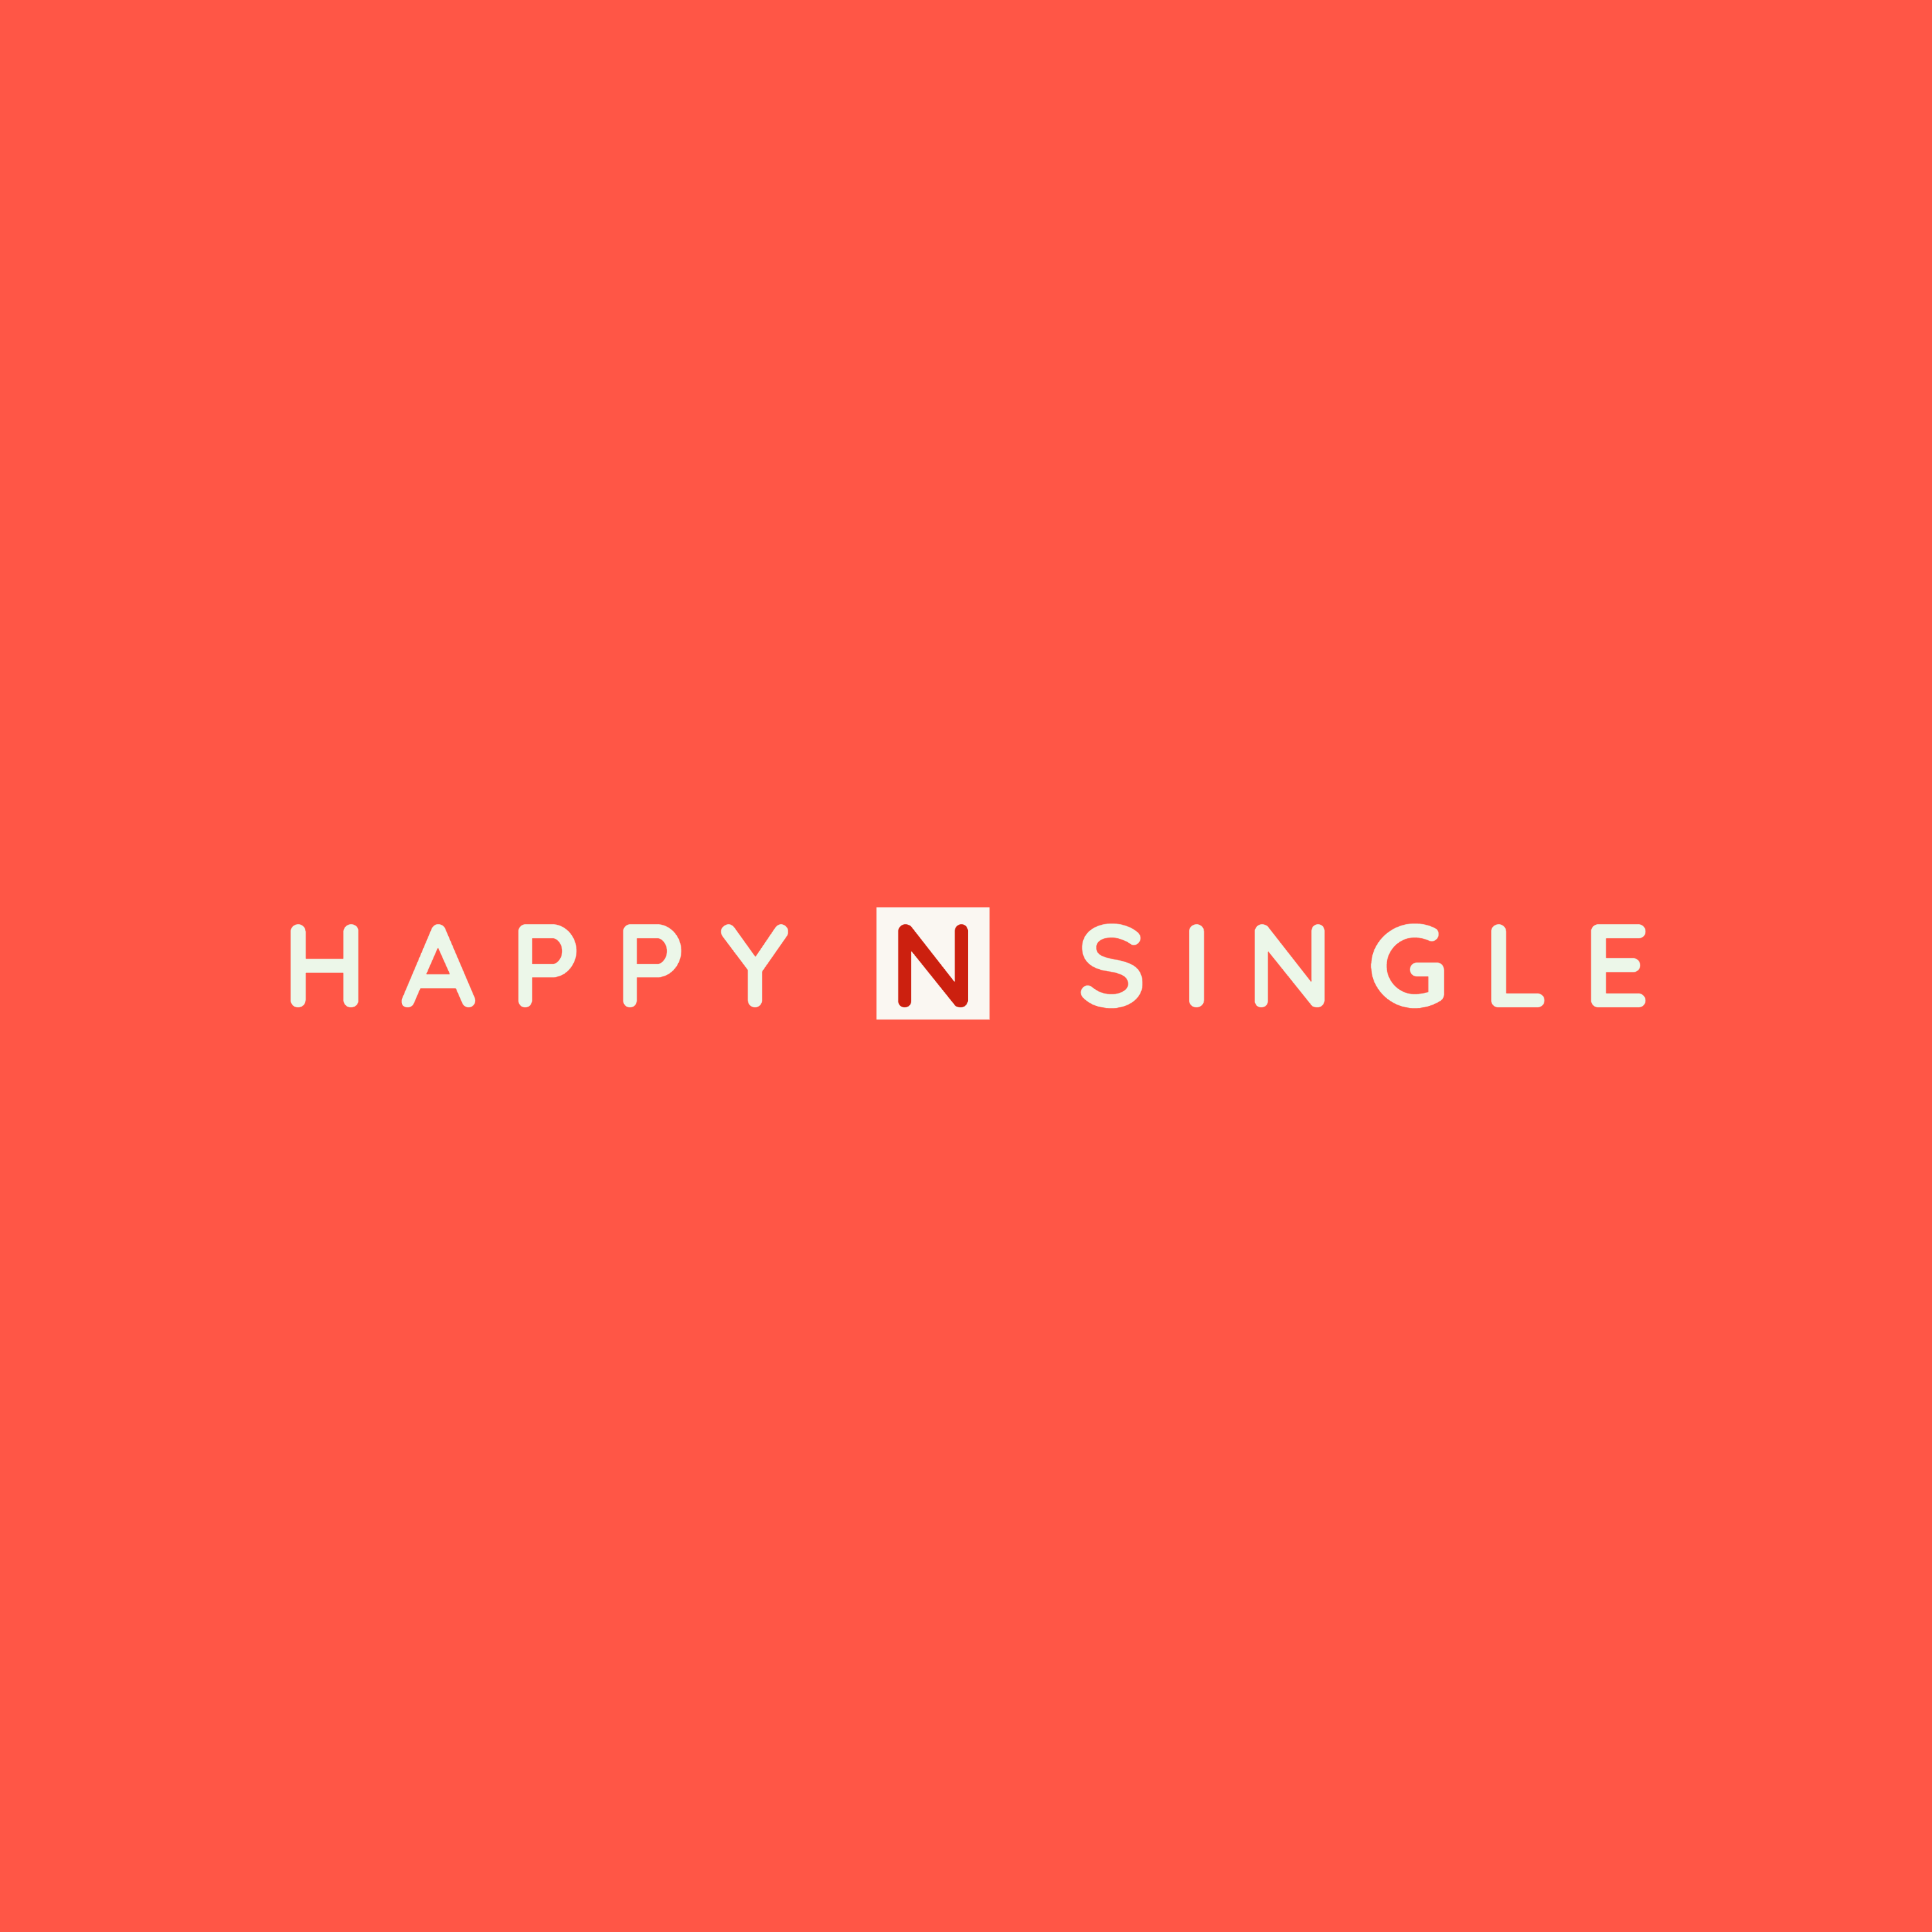 My Story: Unhappily Single to Single N Happy